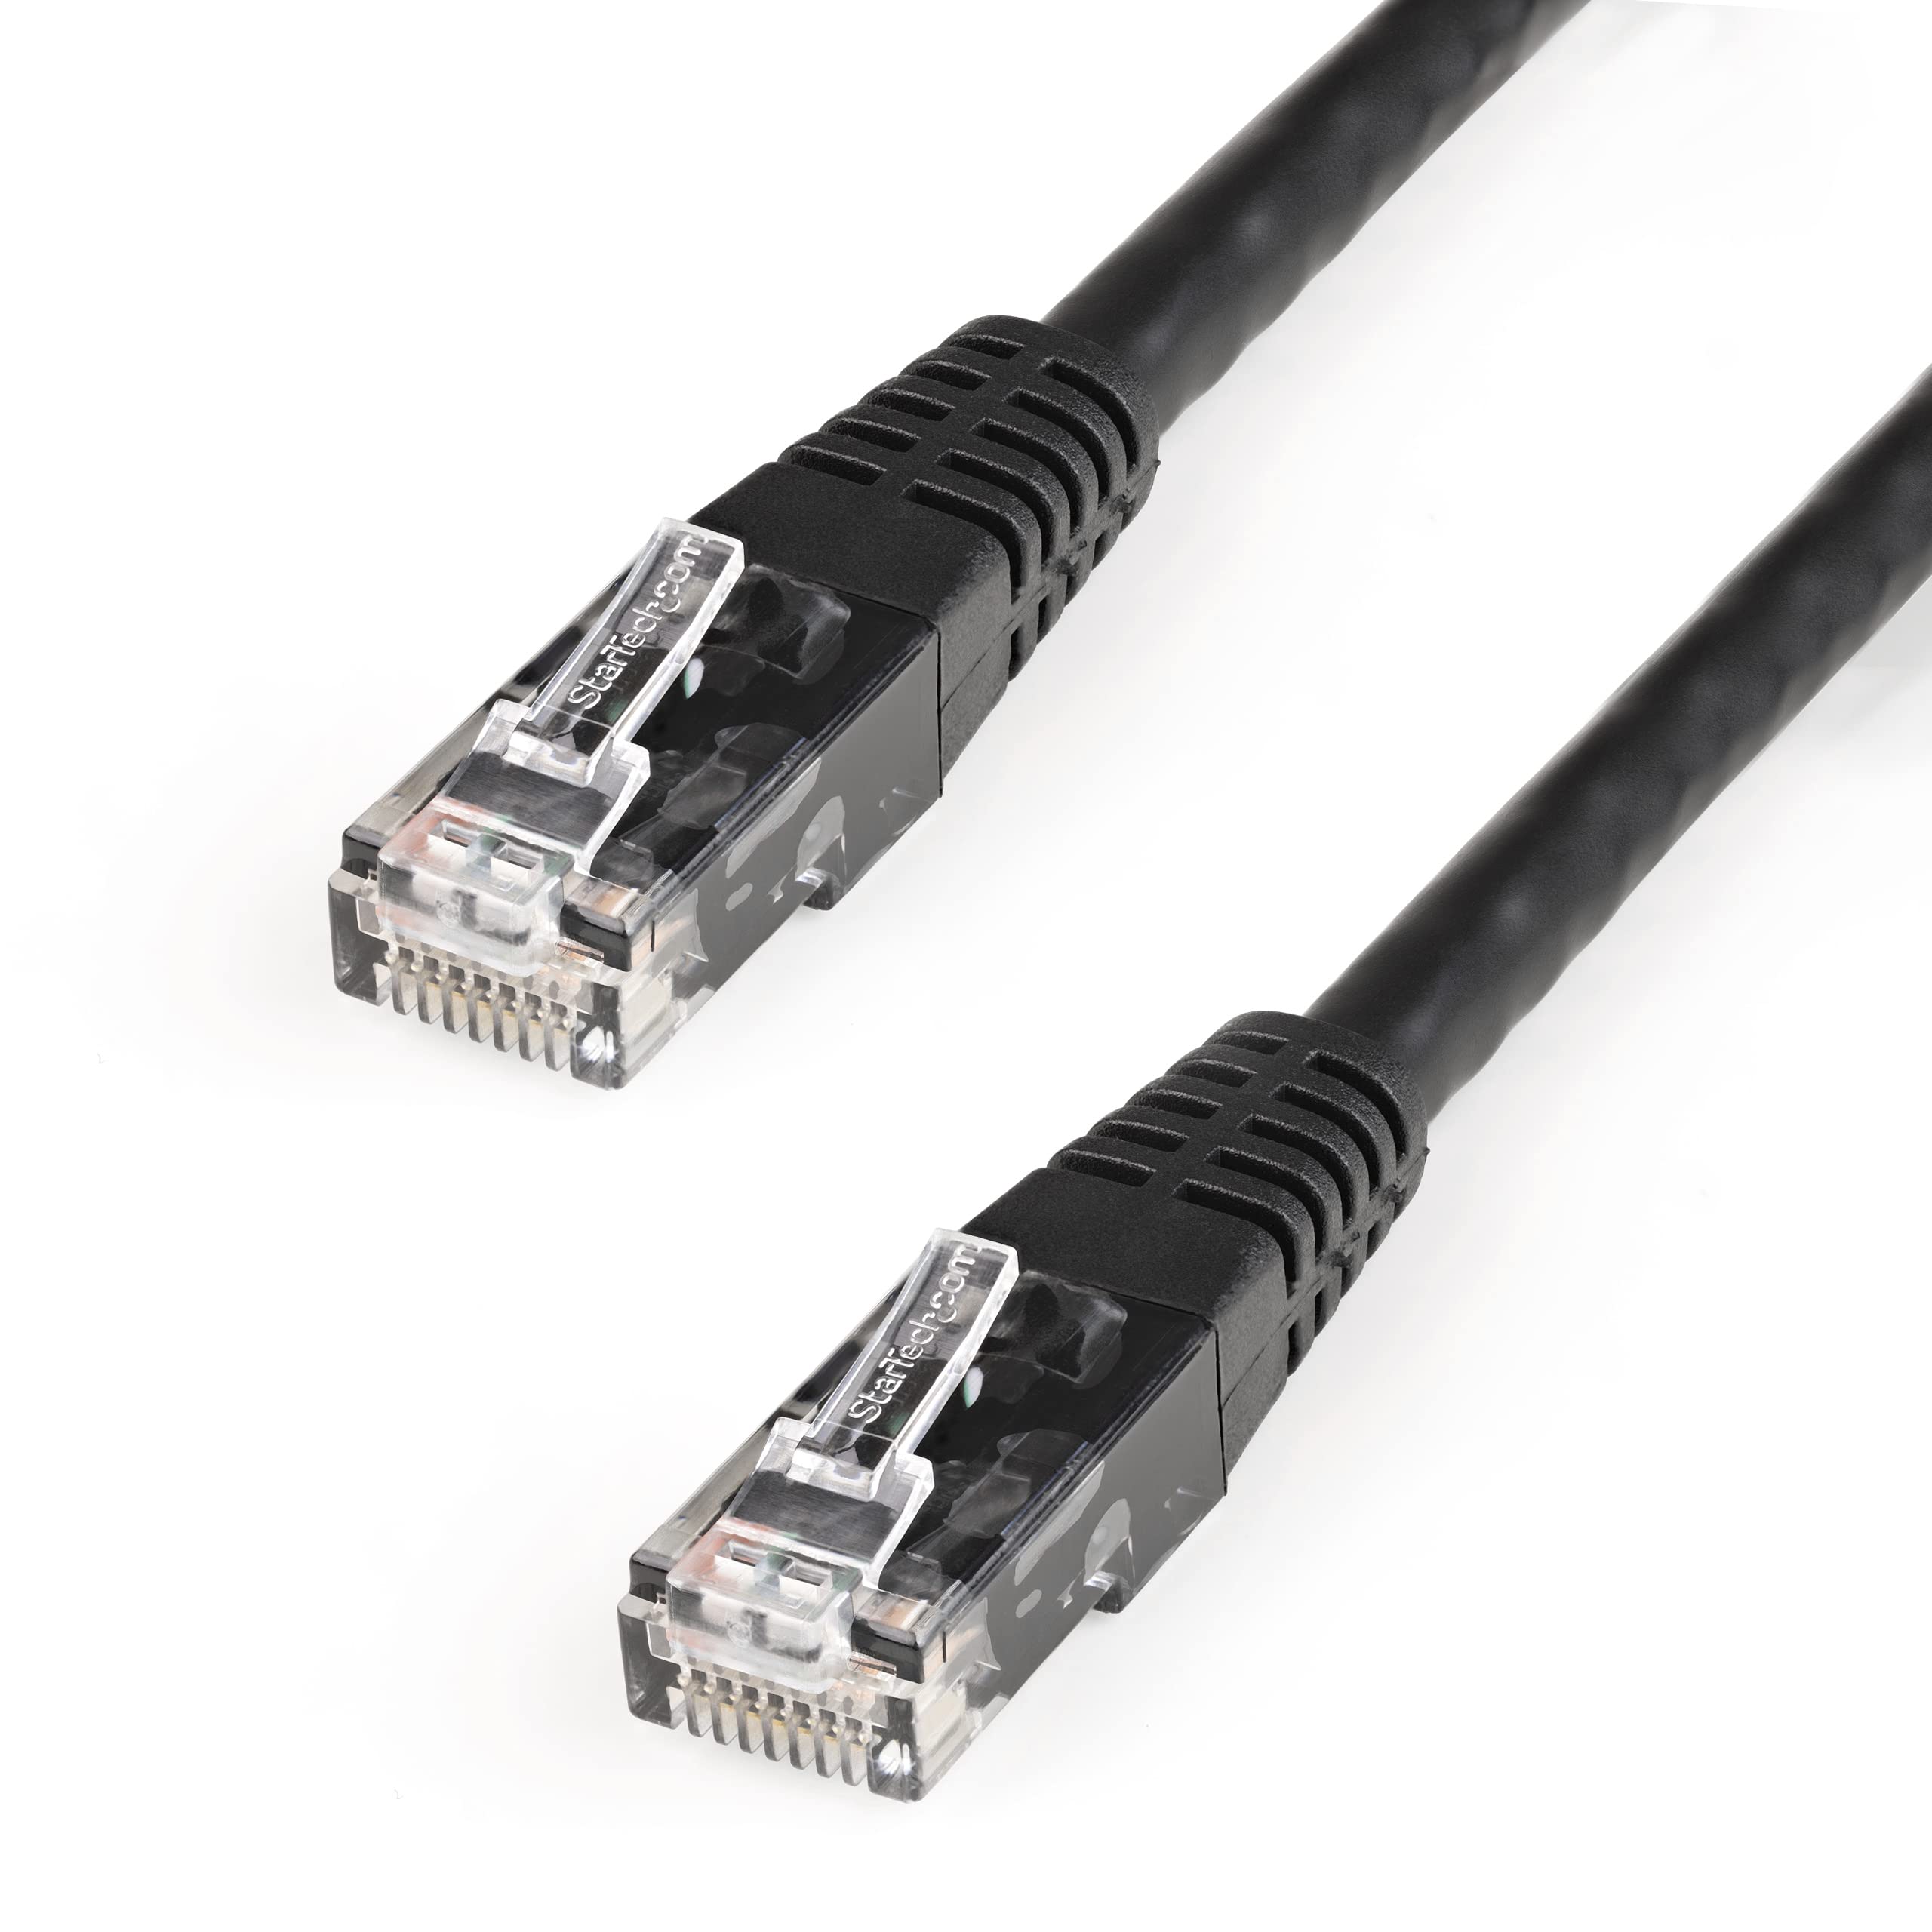 Book Cover StarTech.com Cat6 Ethernet Cable - 8 ft - Black - Patch Cable - Molded Cat6 Cable - Short Network Cable - Ethernet Cord - Cat 6 Cable - 8ft (C6PATCH8BK)